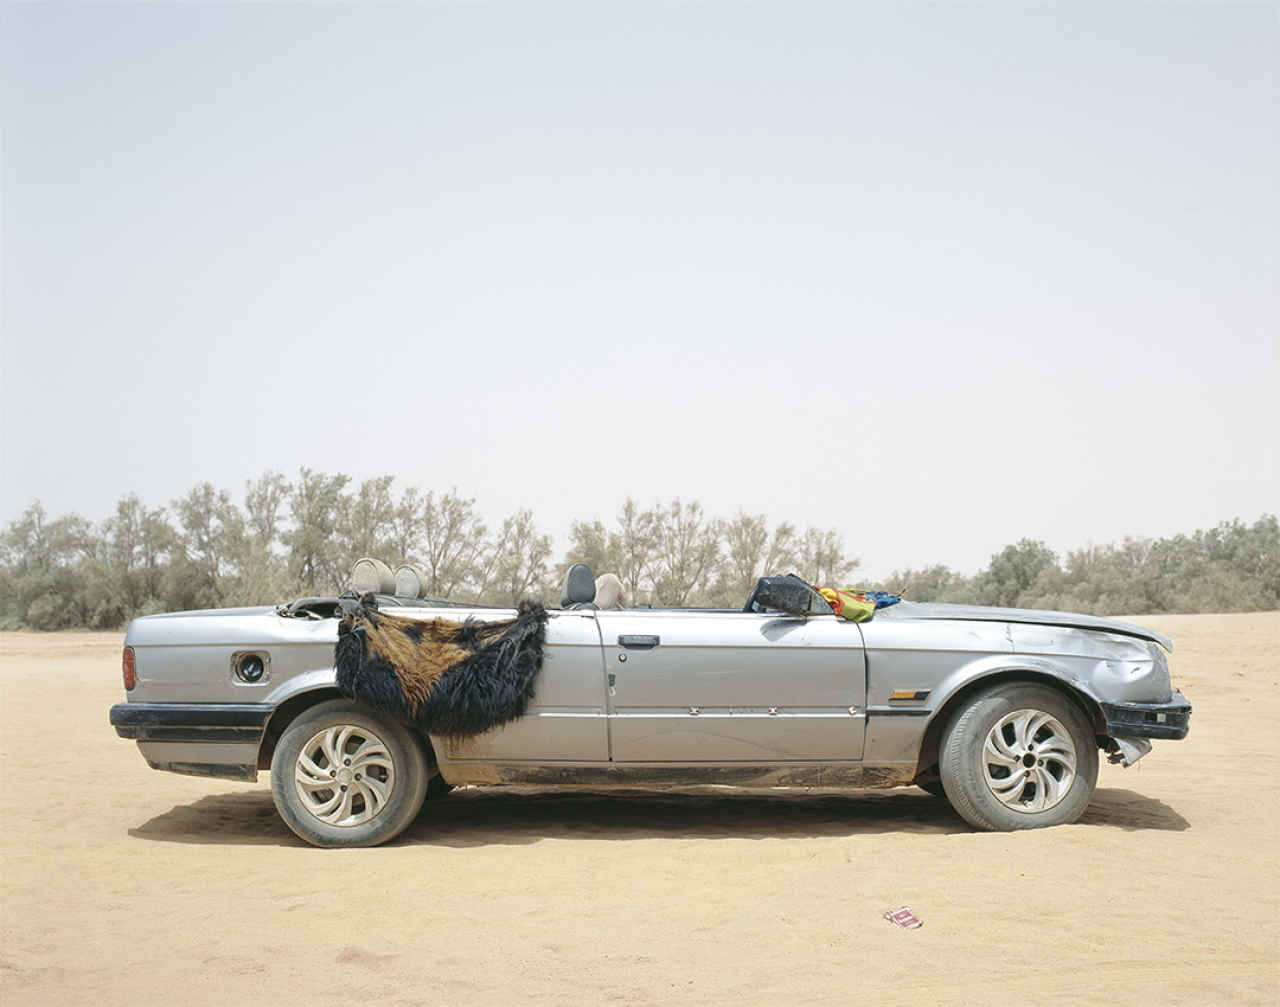 Philippe Dudouit, Ubari, Southern Libya 2, 2015. Tuareg tribal militia group vehicle. From the series,'THE DYNAMICS OF DUST' - The South Edition